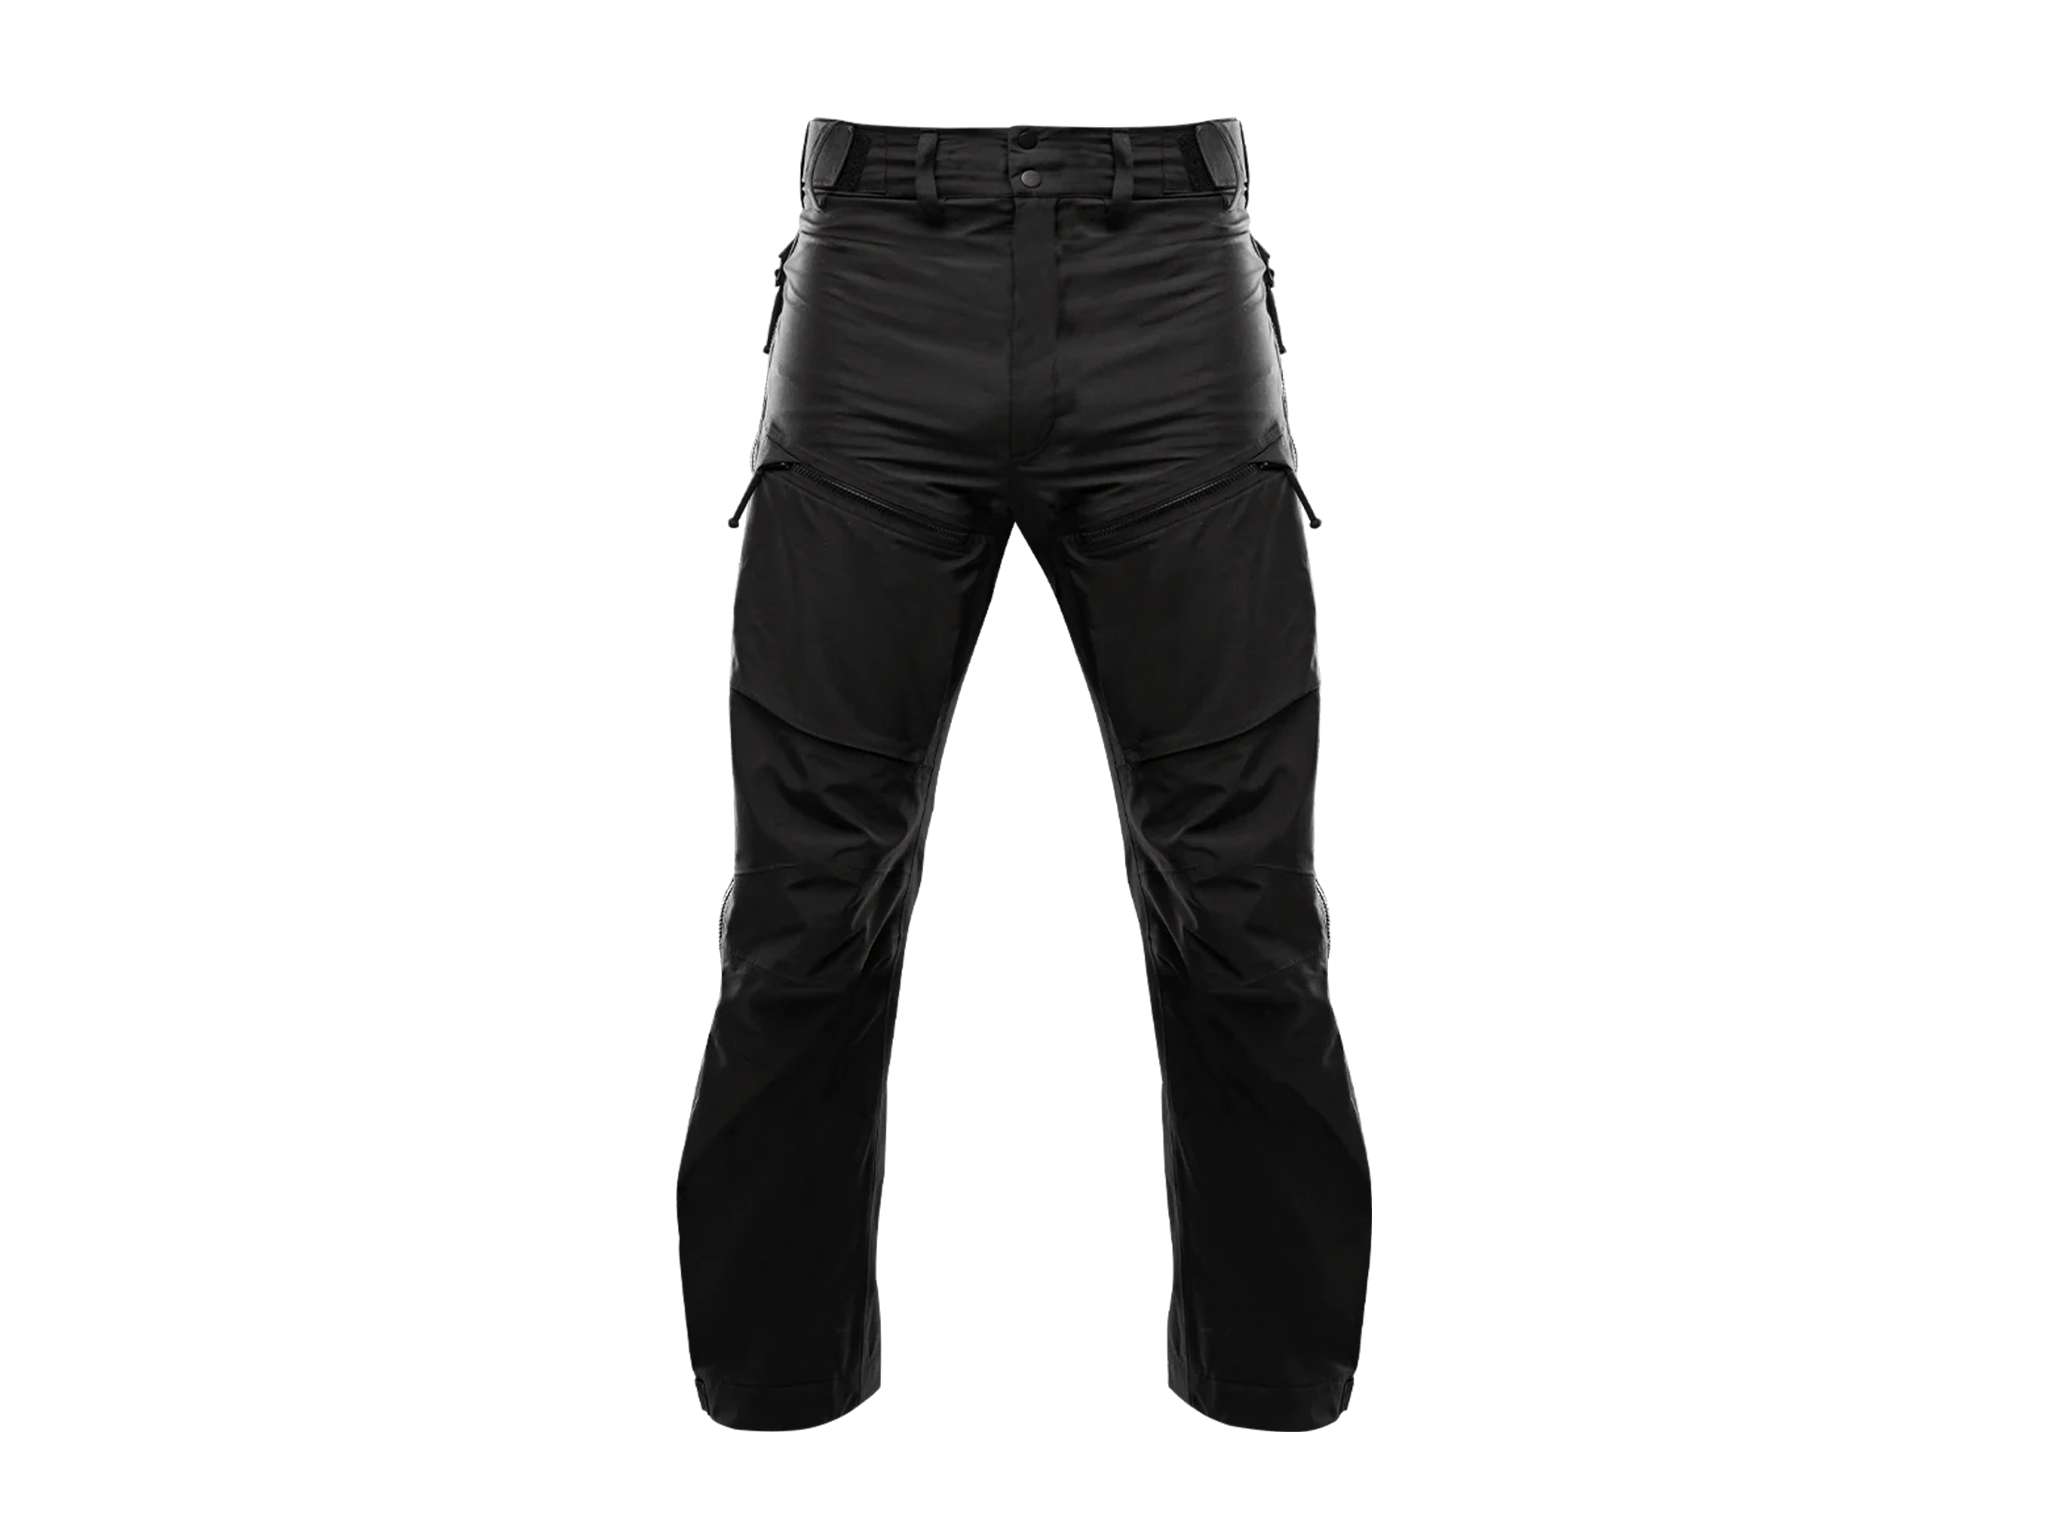 Our Top 6 Best Selling Work Trousers | Wirral Workwear